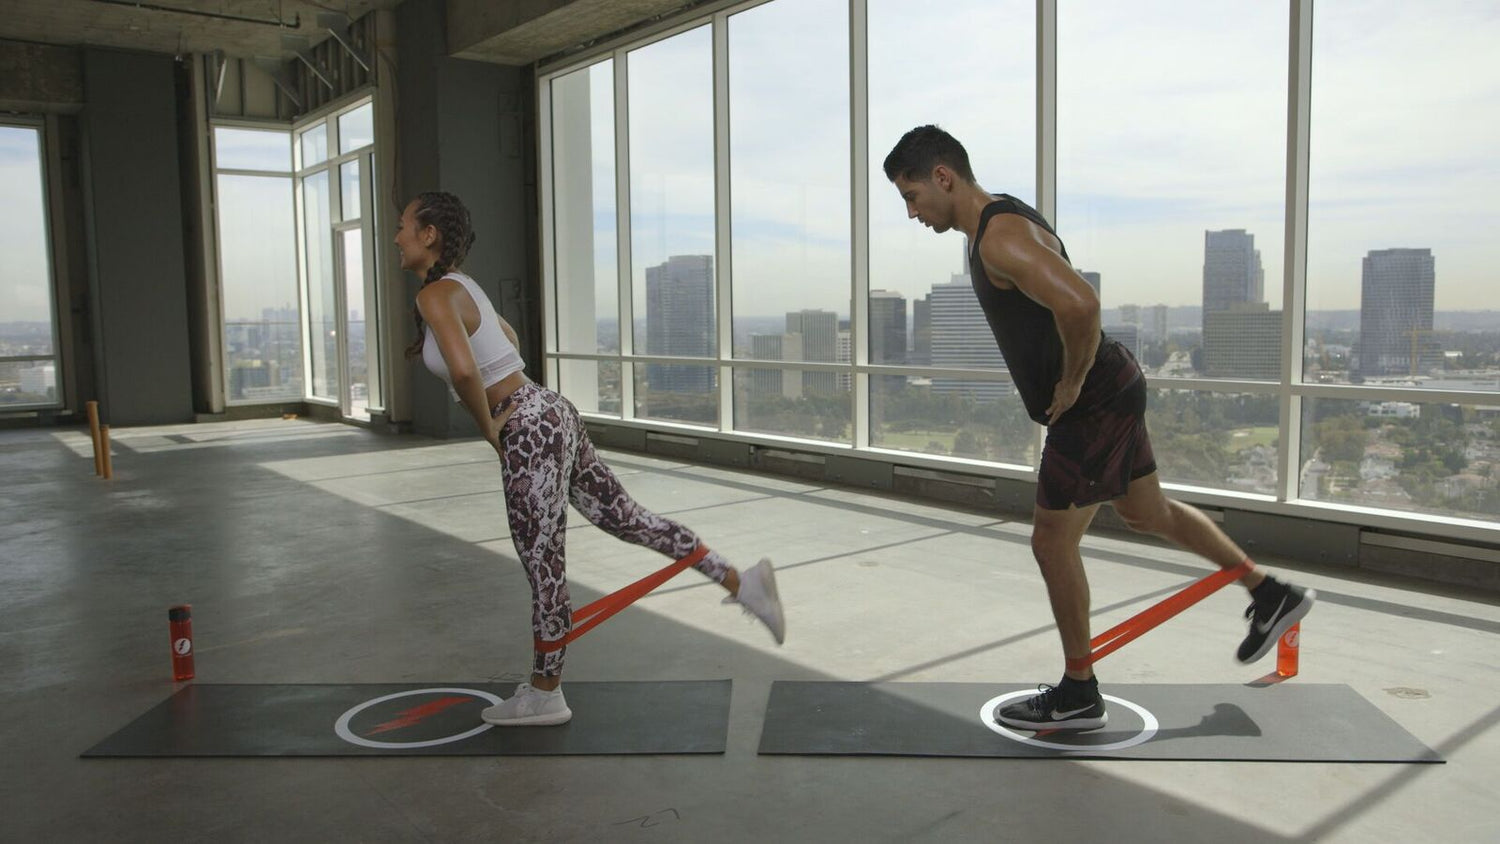 Resistance Band Leg Exercises for Tight, Toned Legs